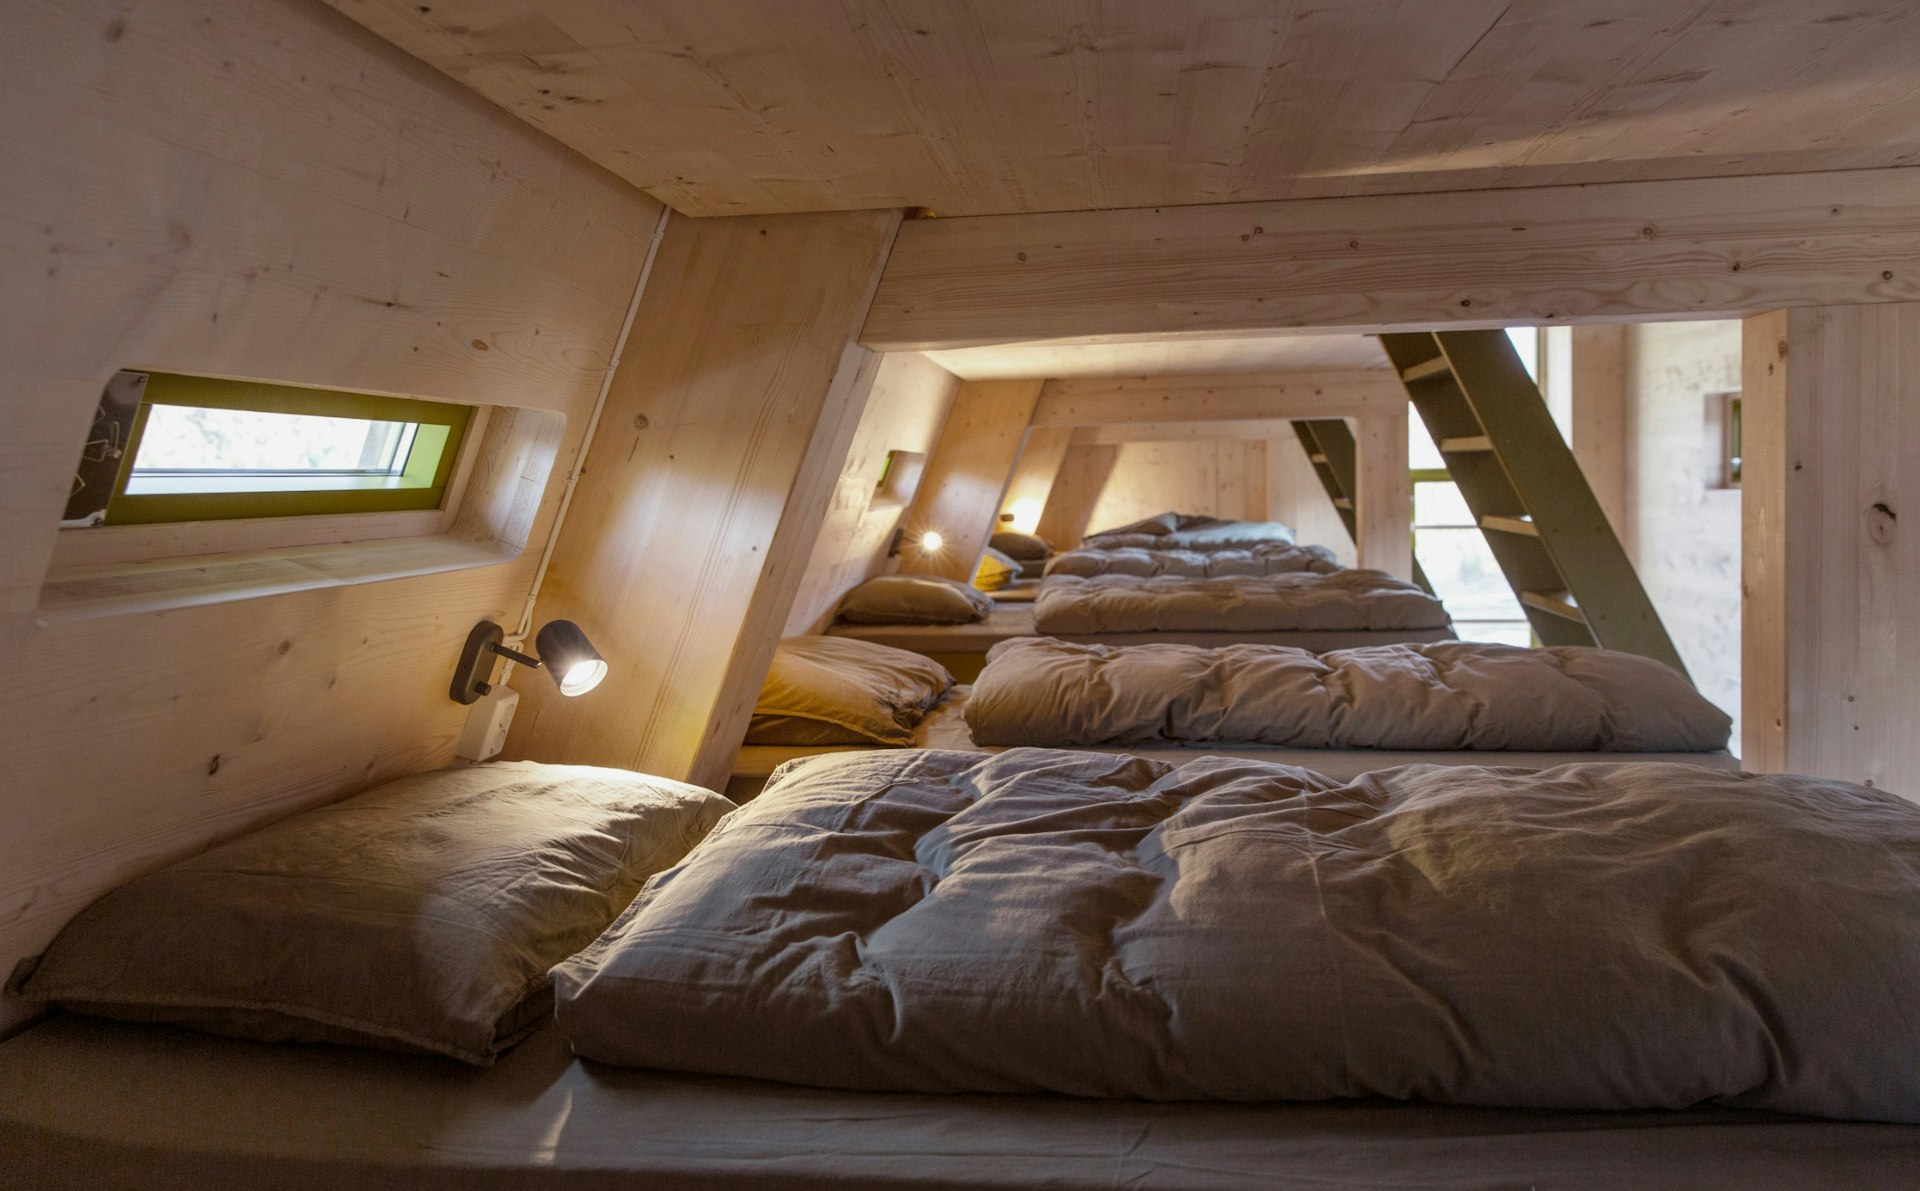 A dormitory at the wooden Tungestølen hiking cabin in Norway